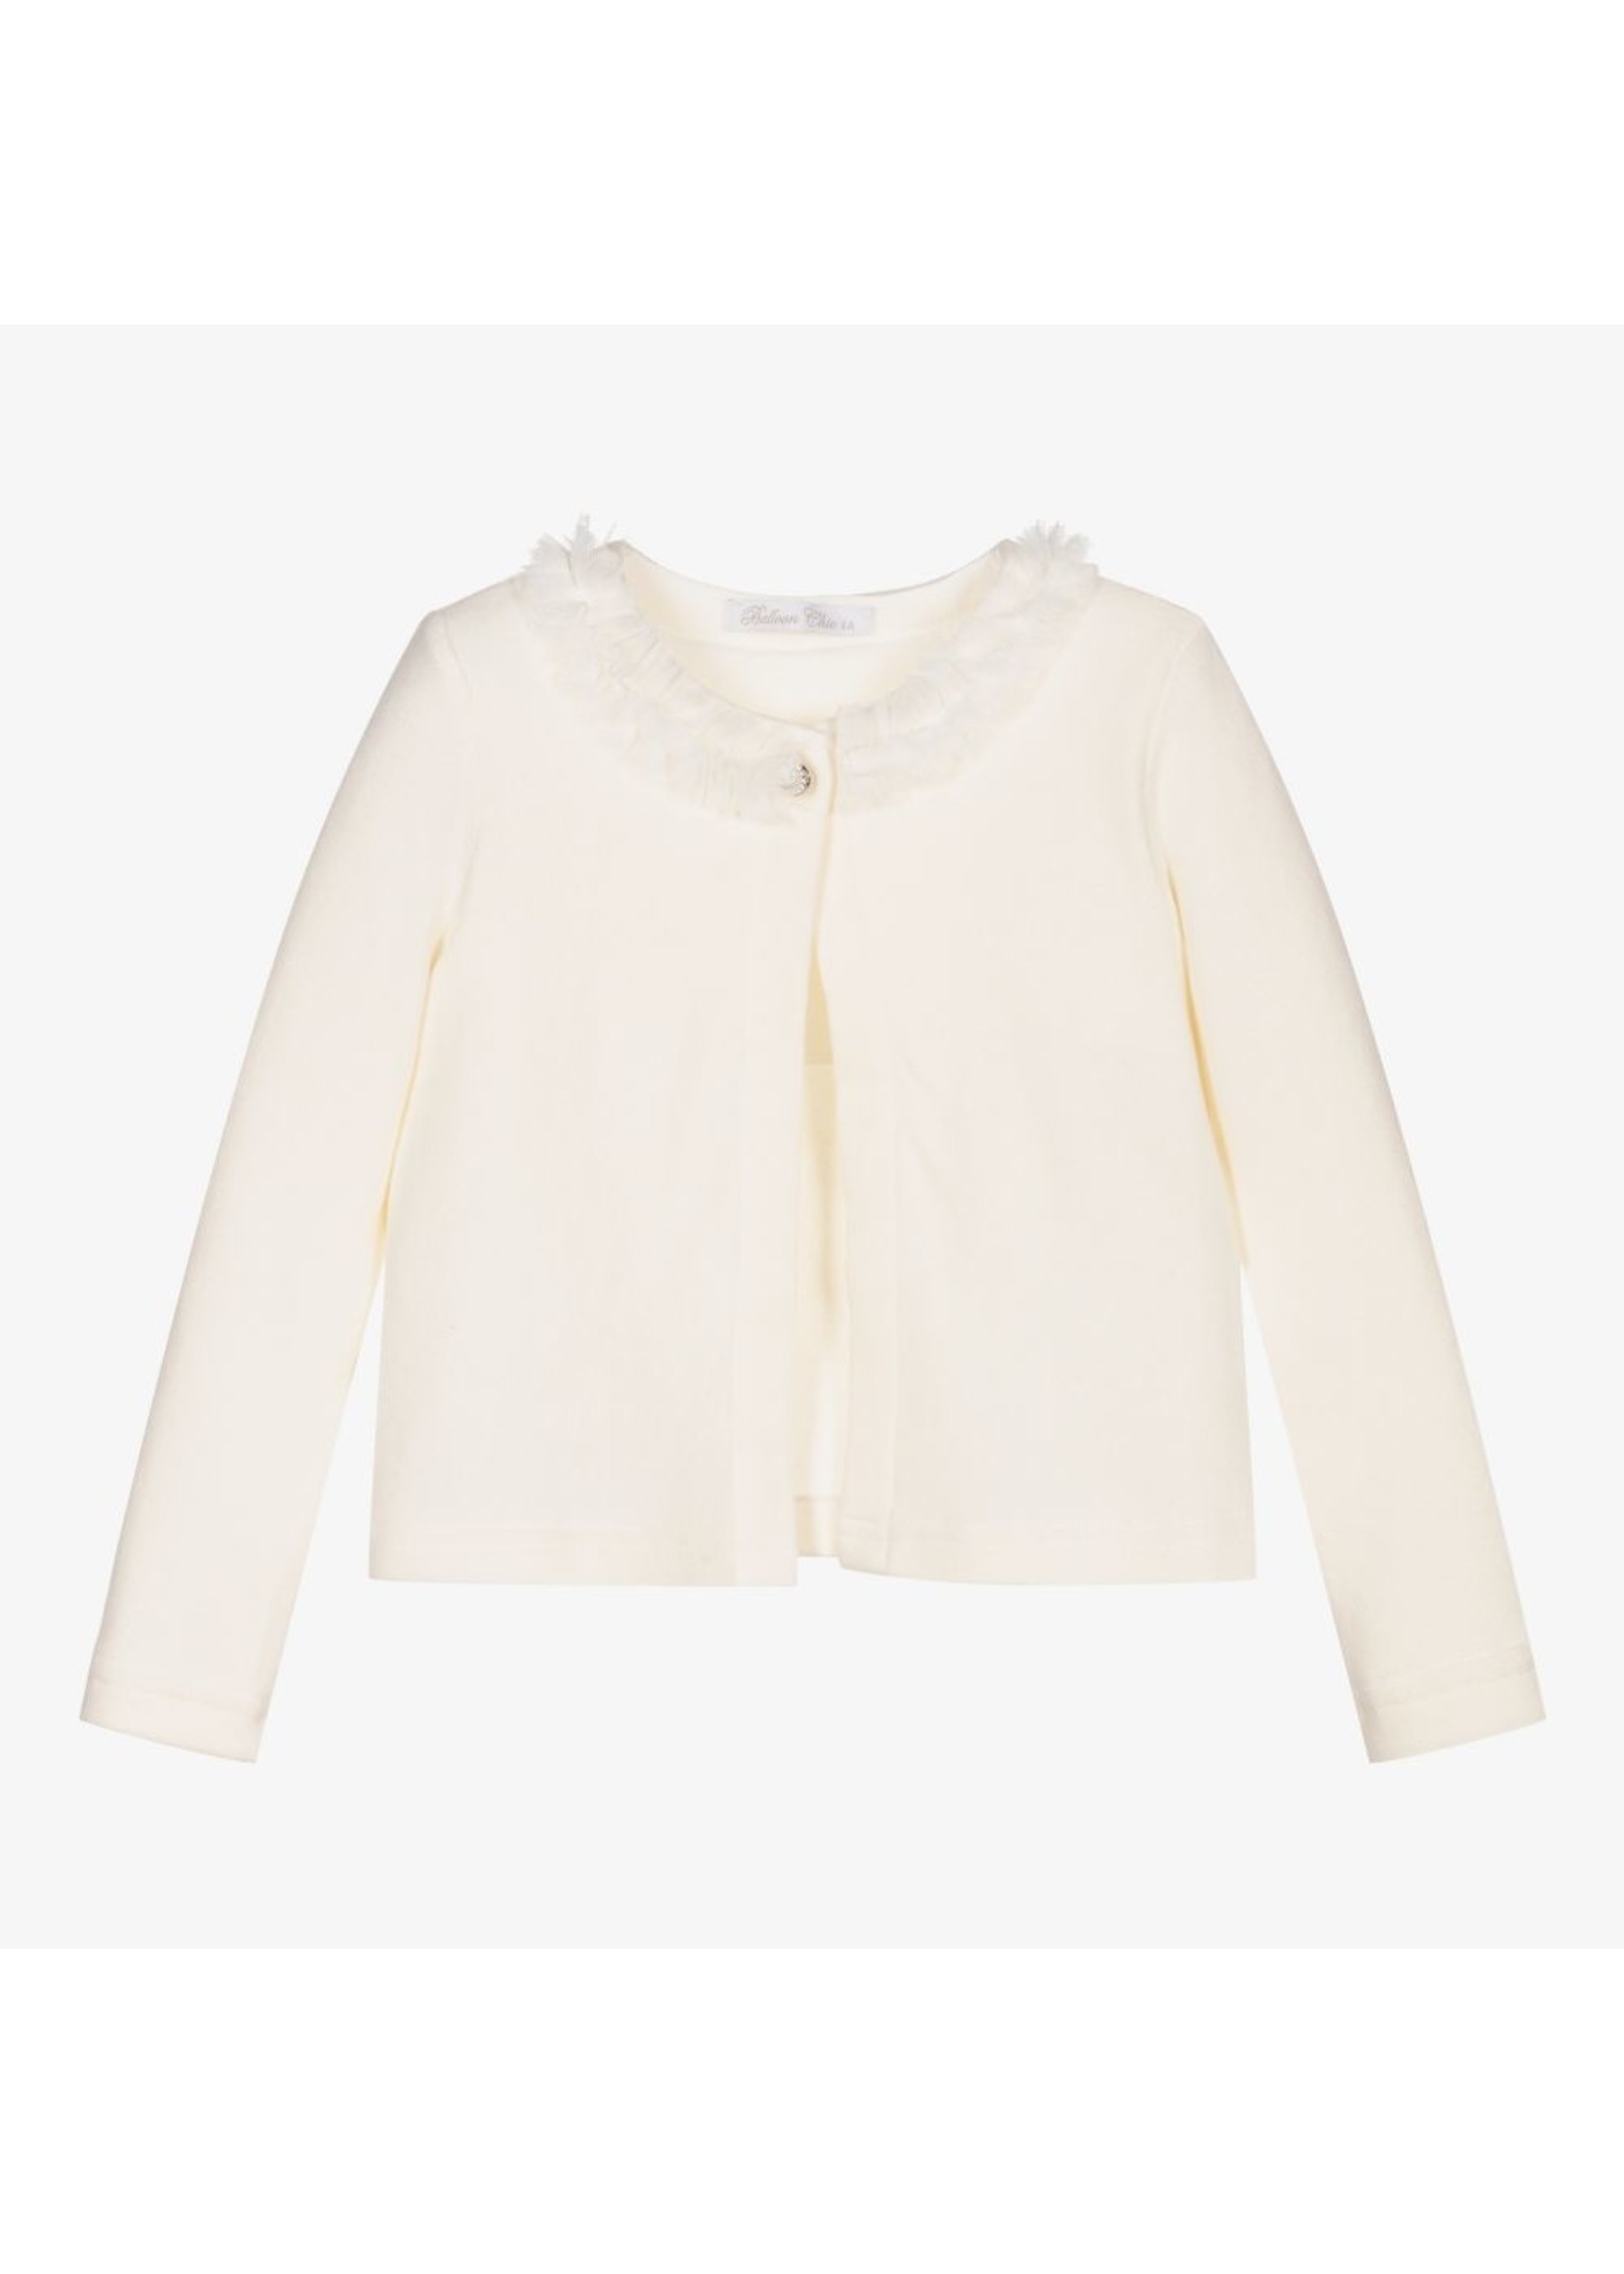 Balloon Chic Balloon Chic  KNITTED JACKET  off white